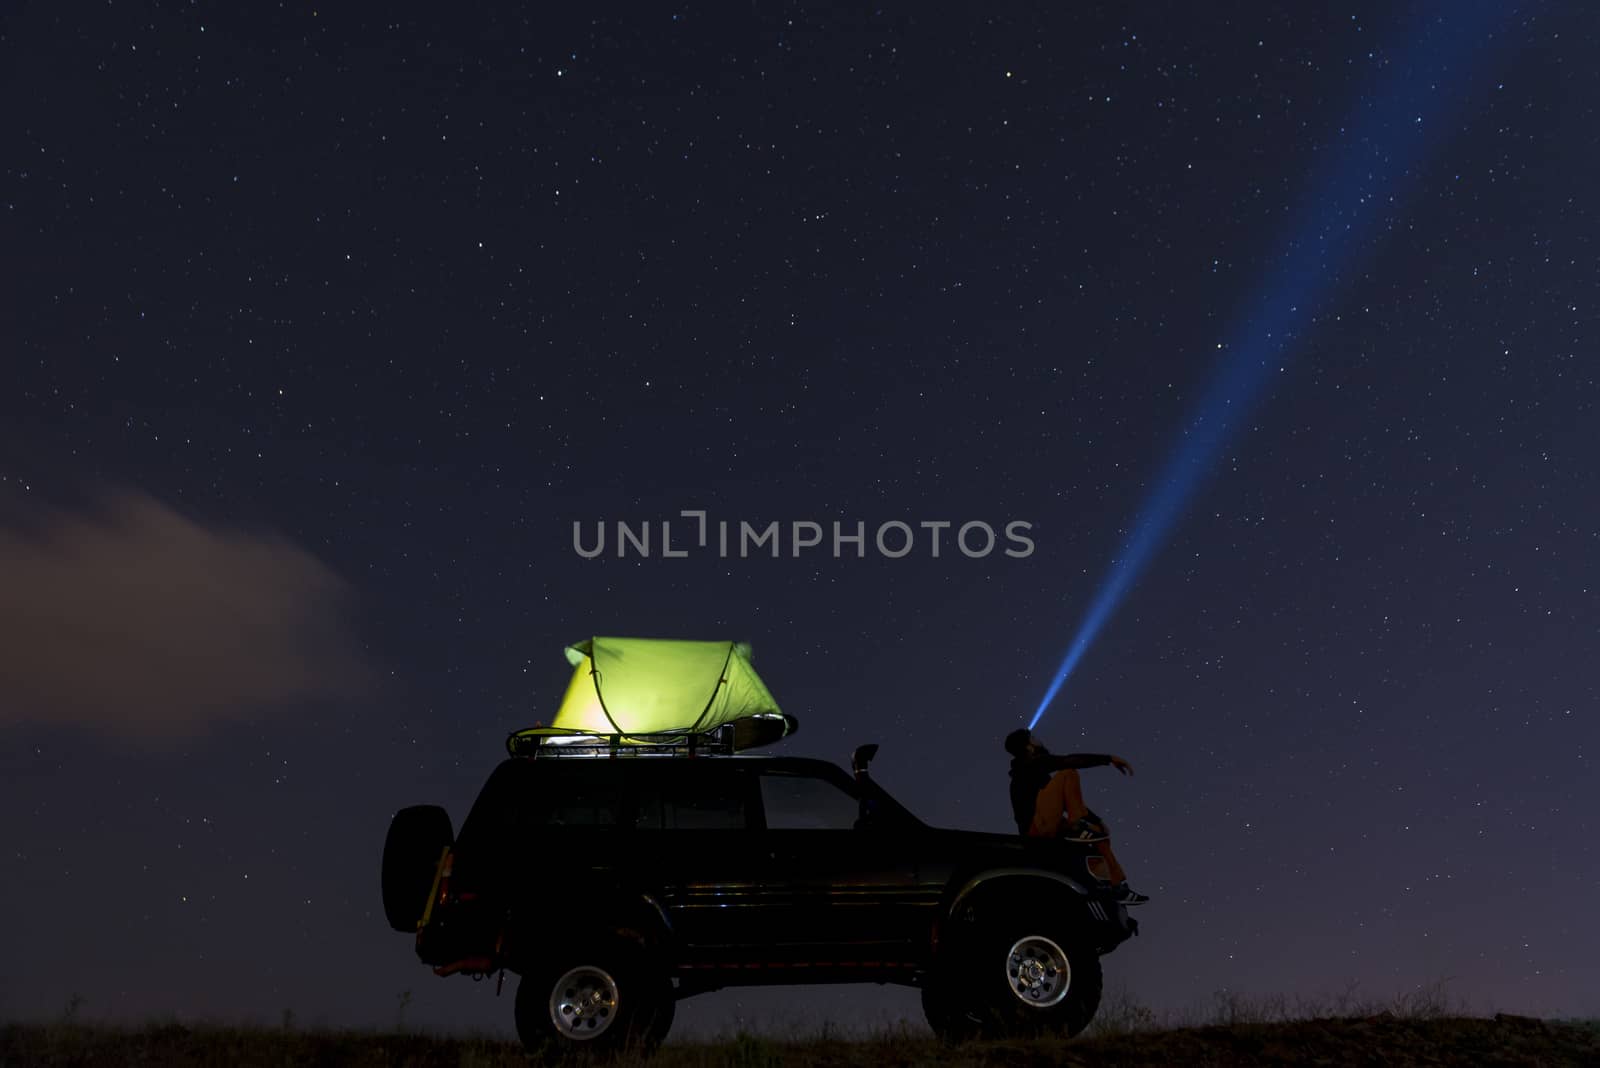 camping the night sky and watch the stars by crazymedia007